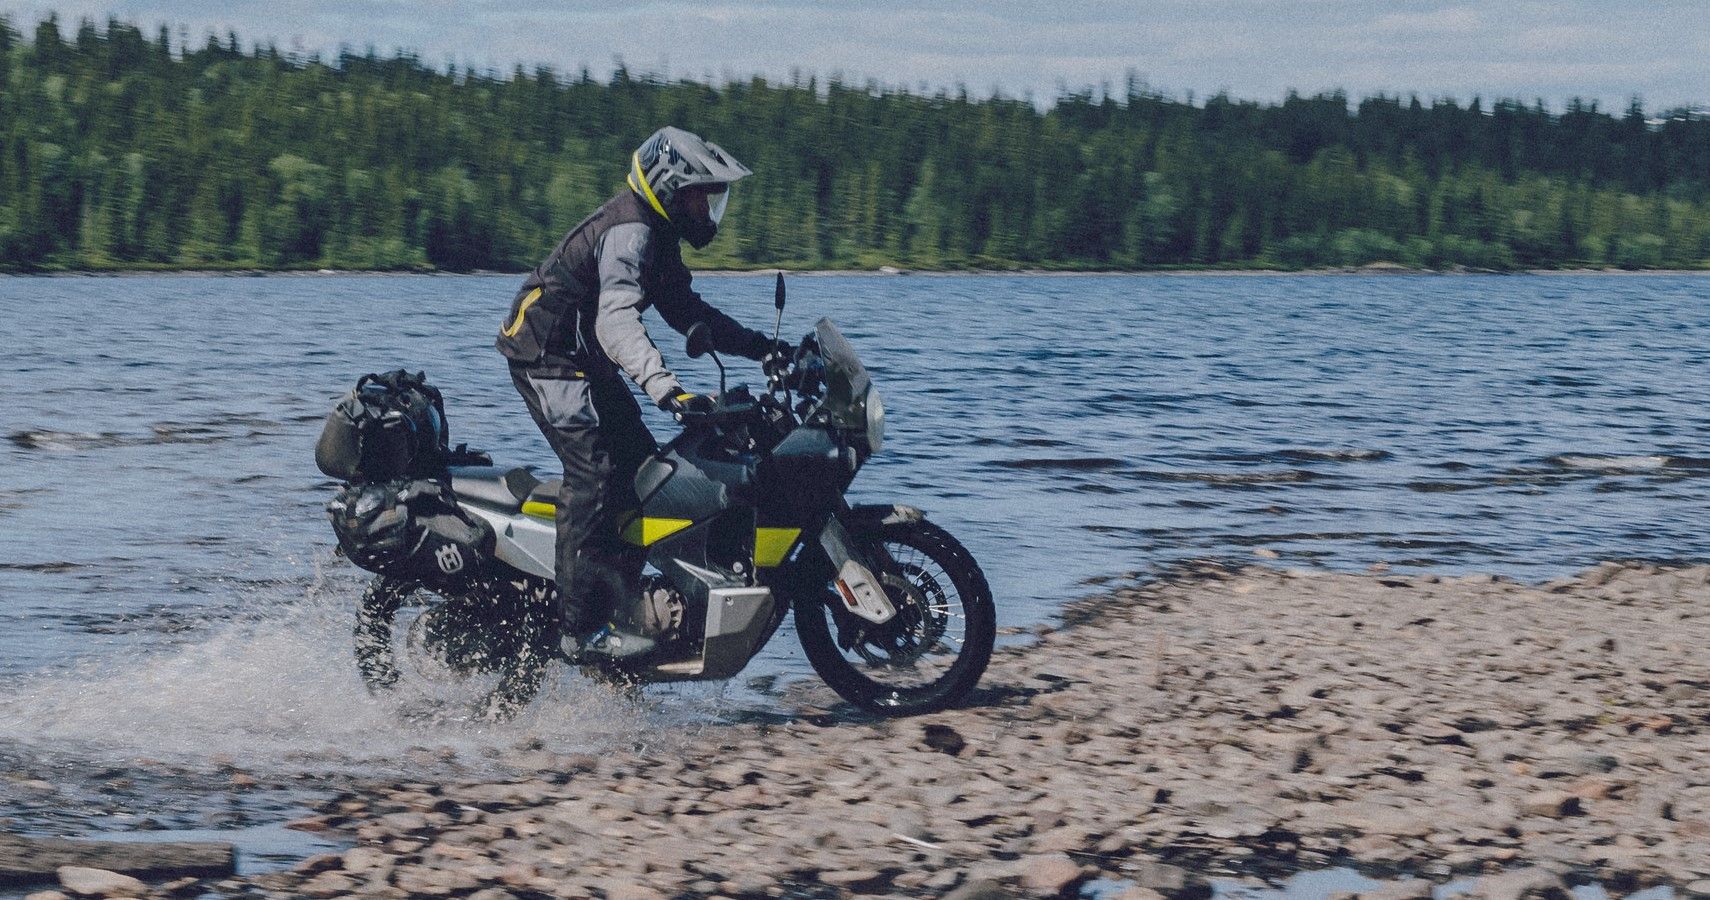 2022 Husqvarna Norden 901 is made to explore the unknown